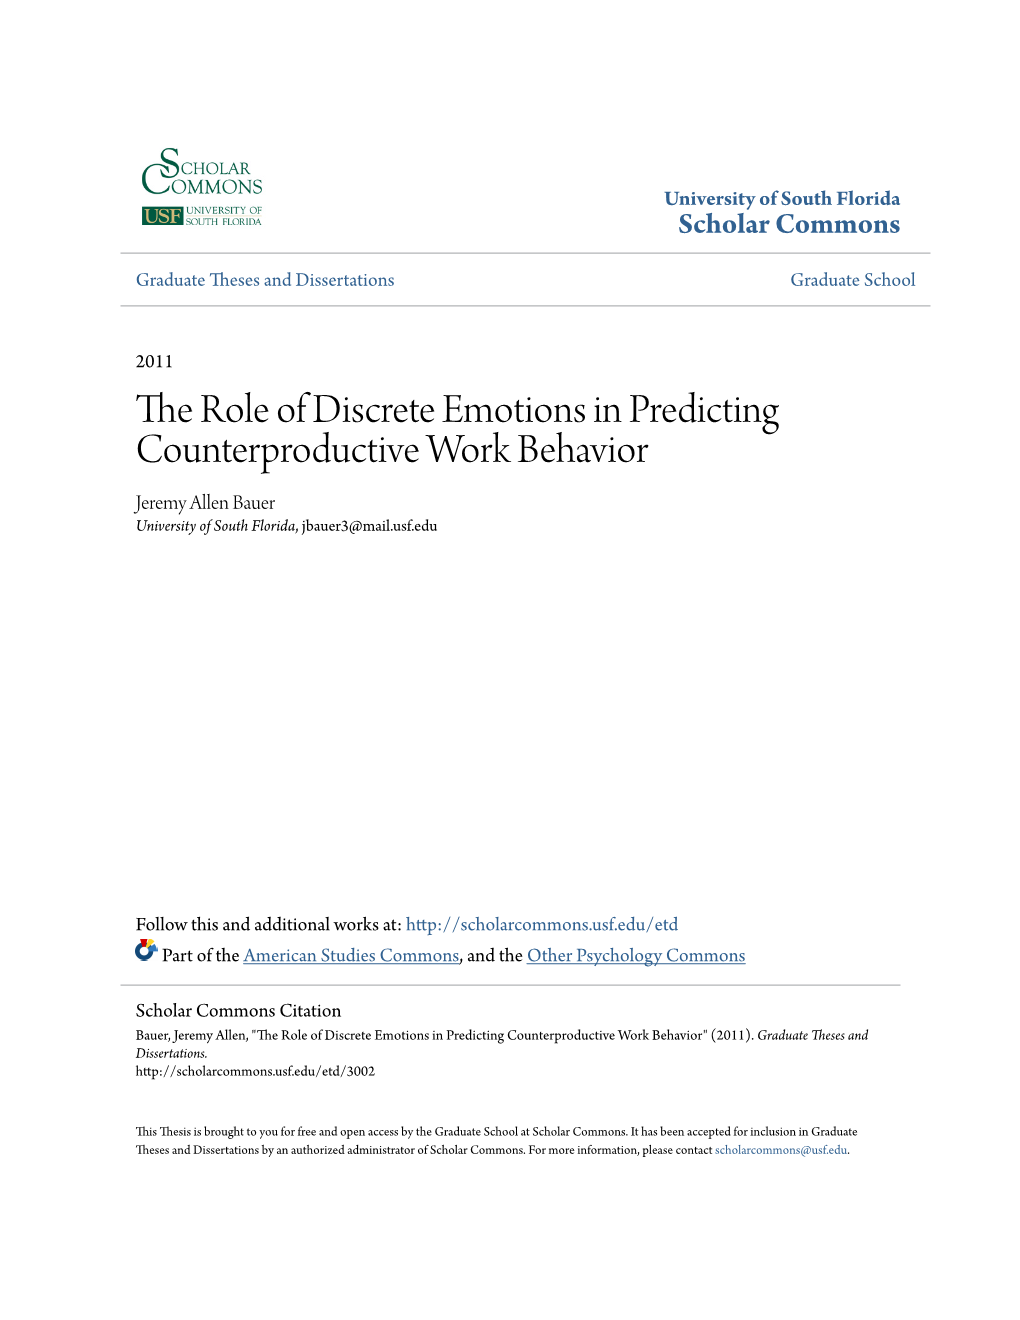 The Role of Discrete Emotions in Predicting Counterproductive Work Behavior Jeremy Allen Bauer University of South Florida, Jbauer3@Mail.Usf.Edu